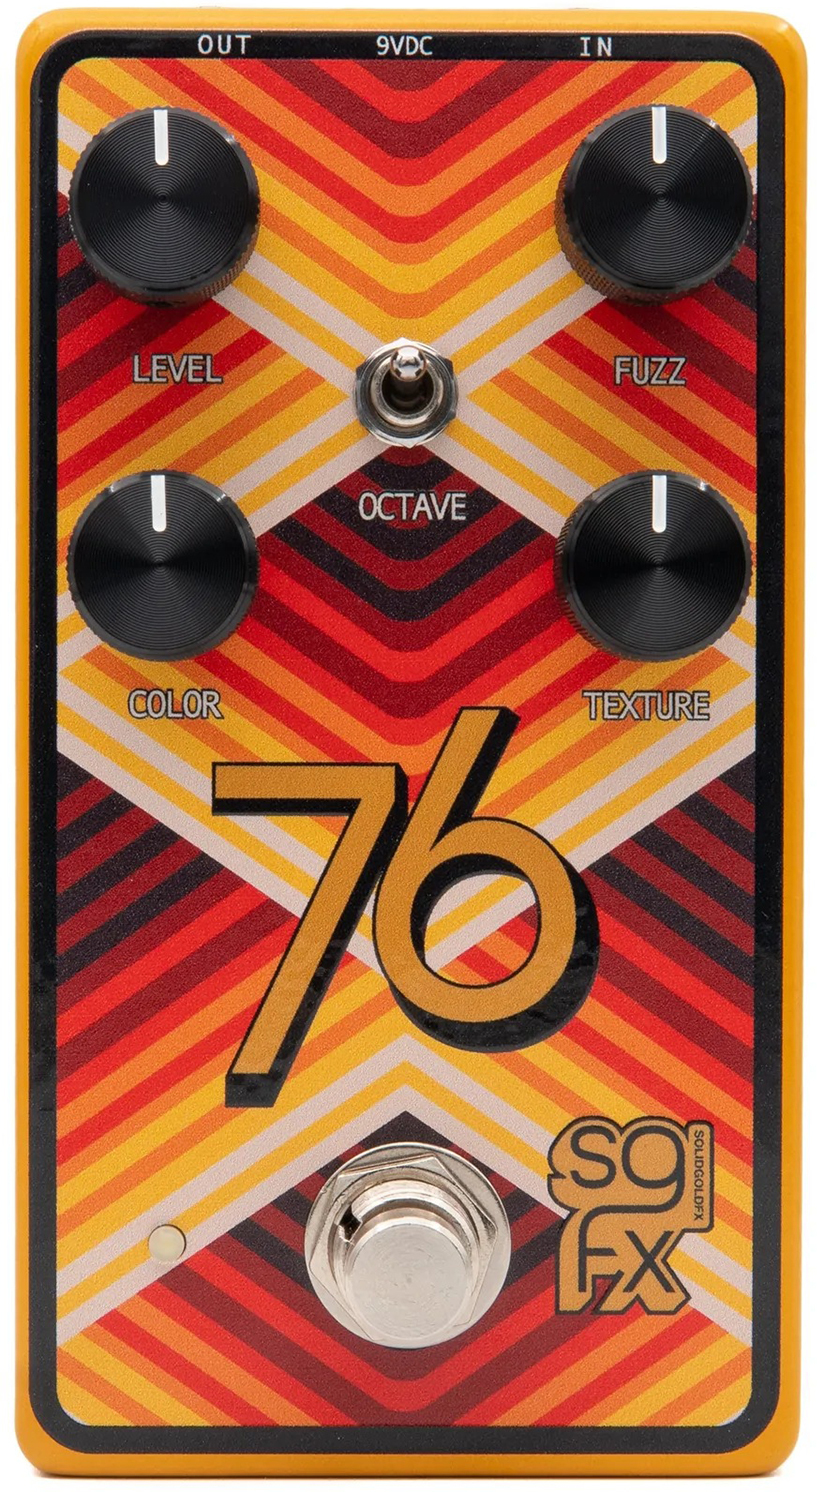 Solidgoldfx 76 Mkii Octave-up Fuzz - Overdrive/Distortion/Fuzz Effektpedal - Main picture